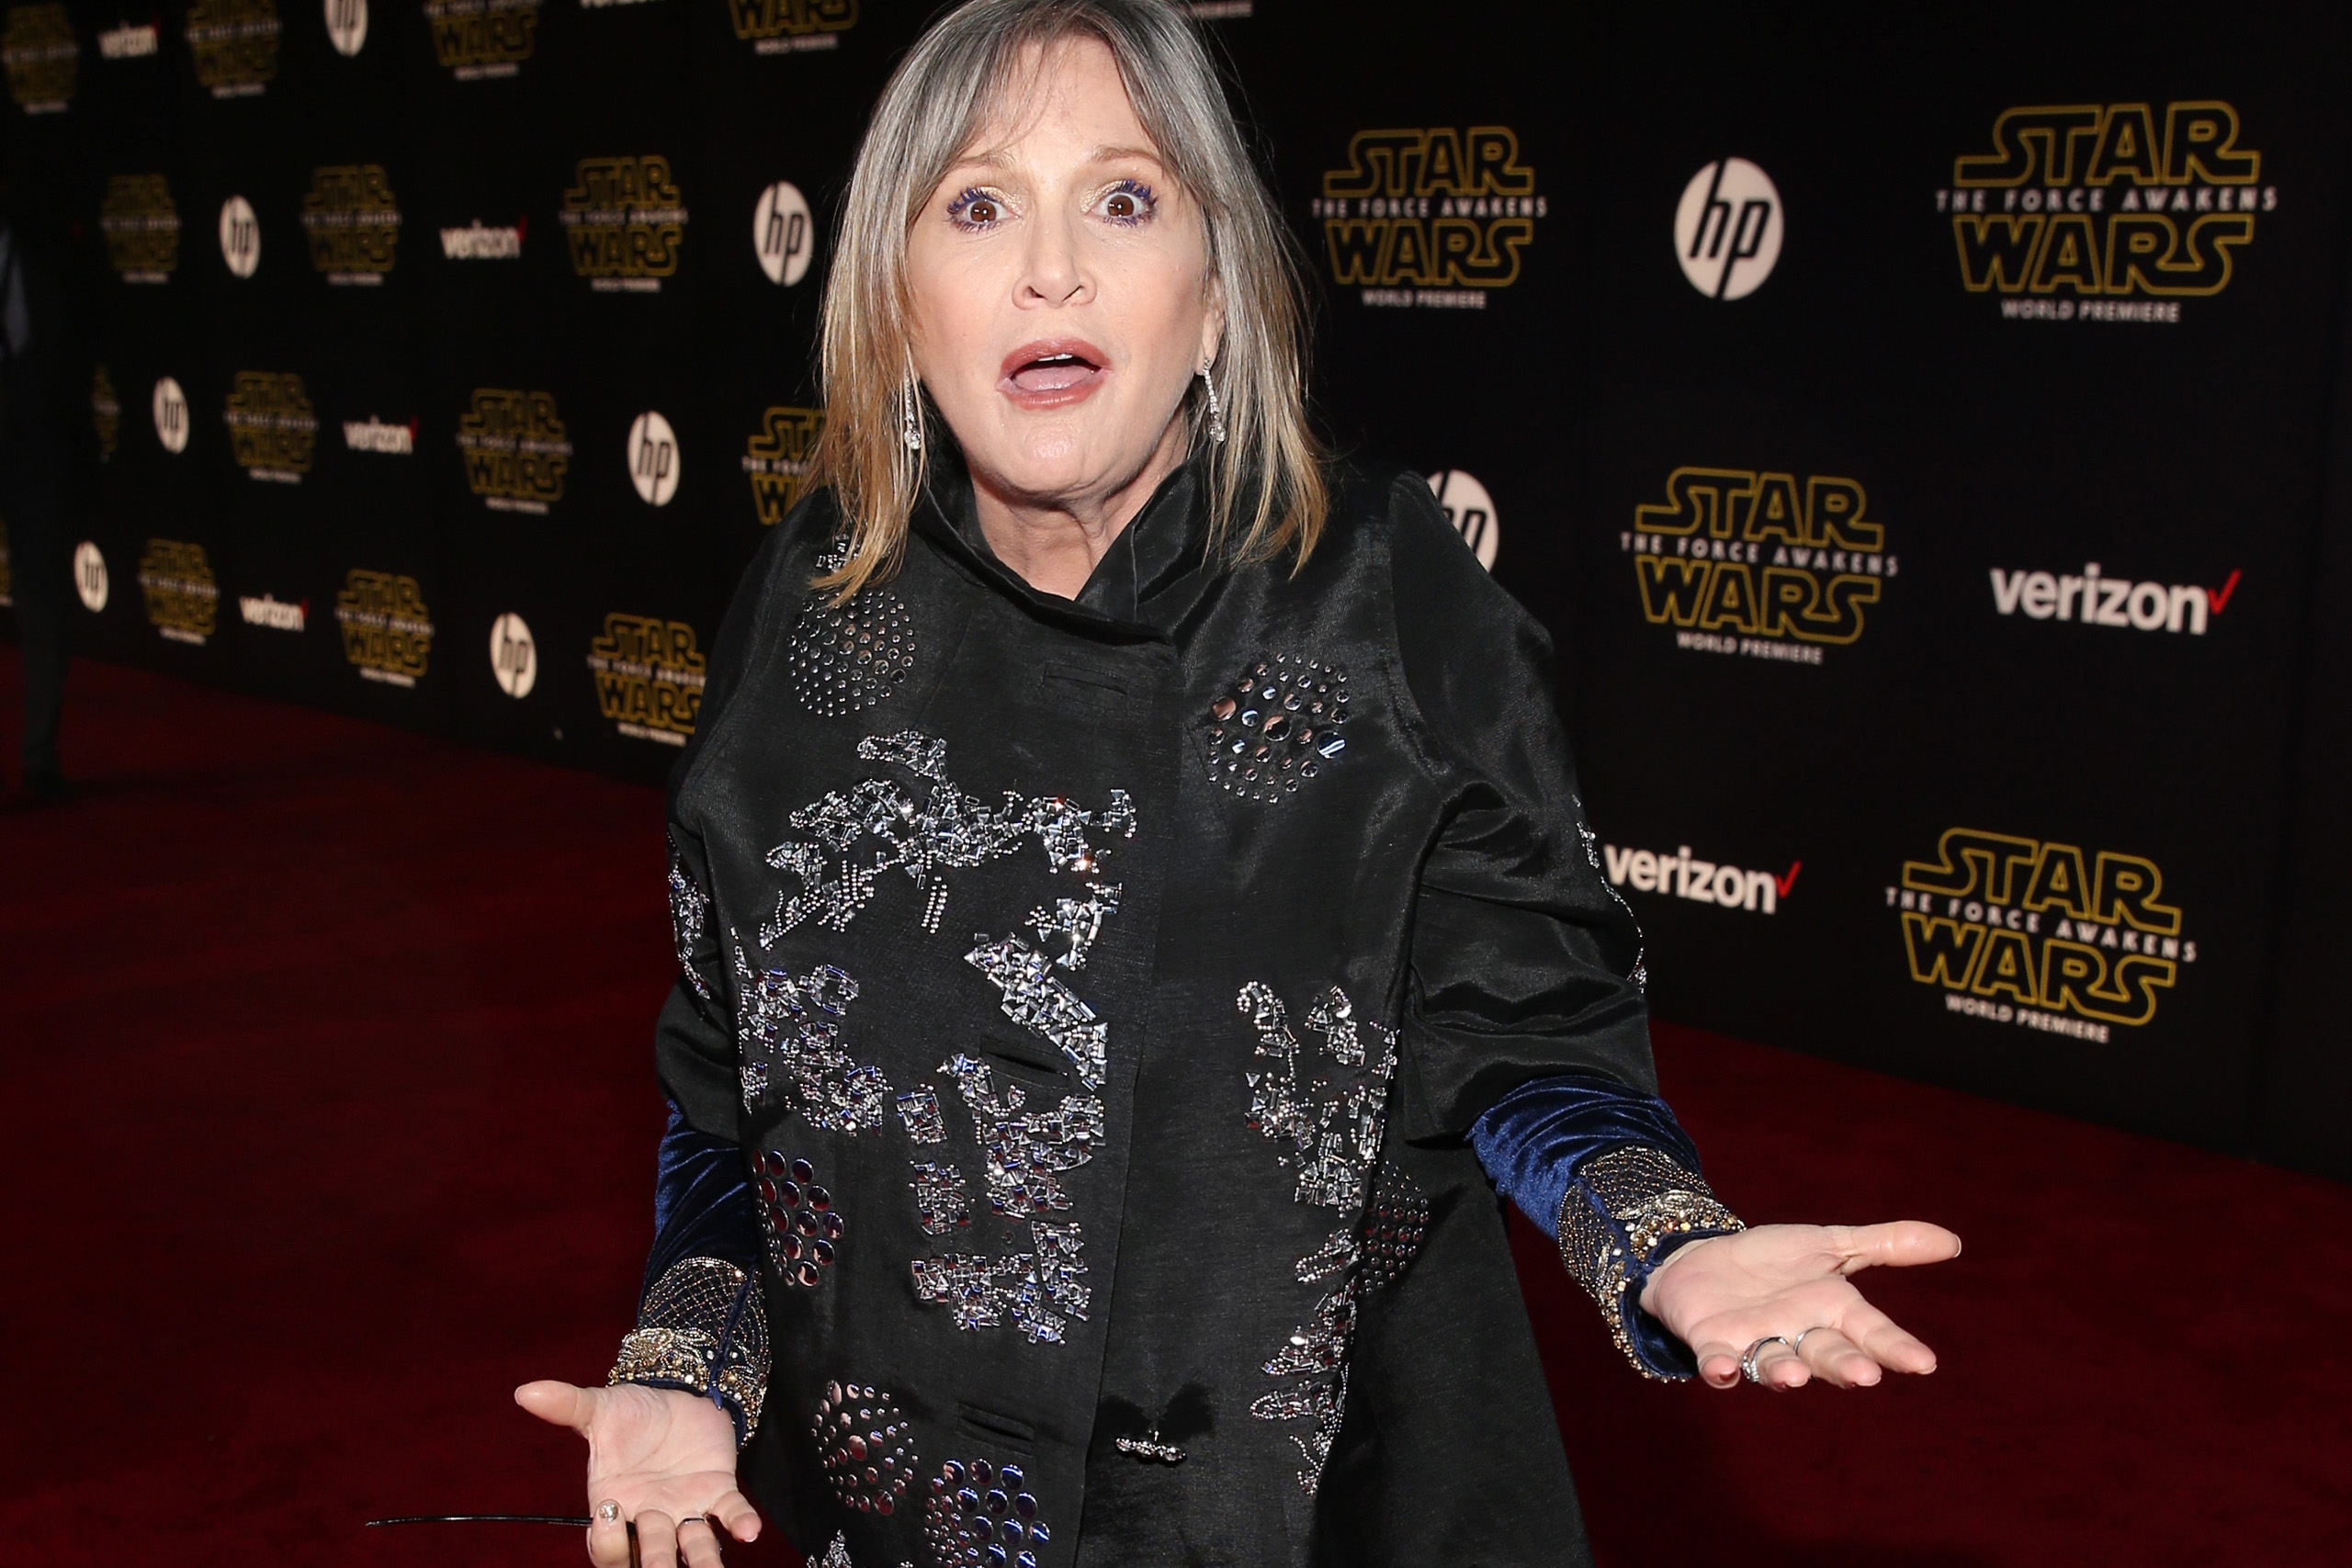 Carrie Fisher attends the World Premiere of Star Wars: The Force Awakens at the Dolby, El Capitan, and TCL Theaters in Hollywood, California, on December 14, 2015. (Jesse Grant—Getty Images for Disney)